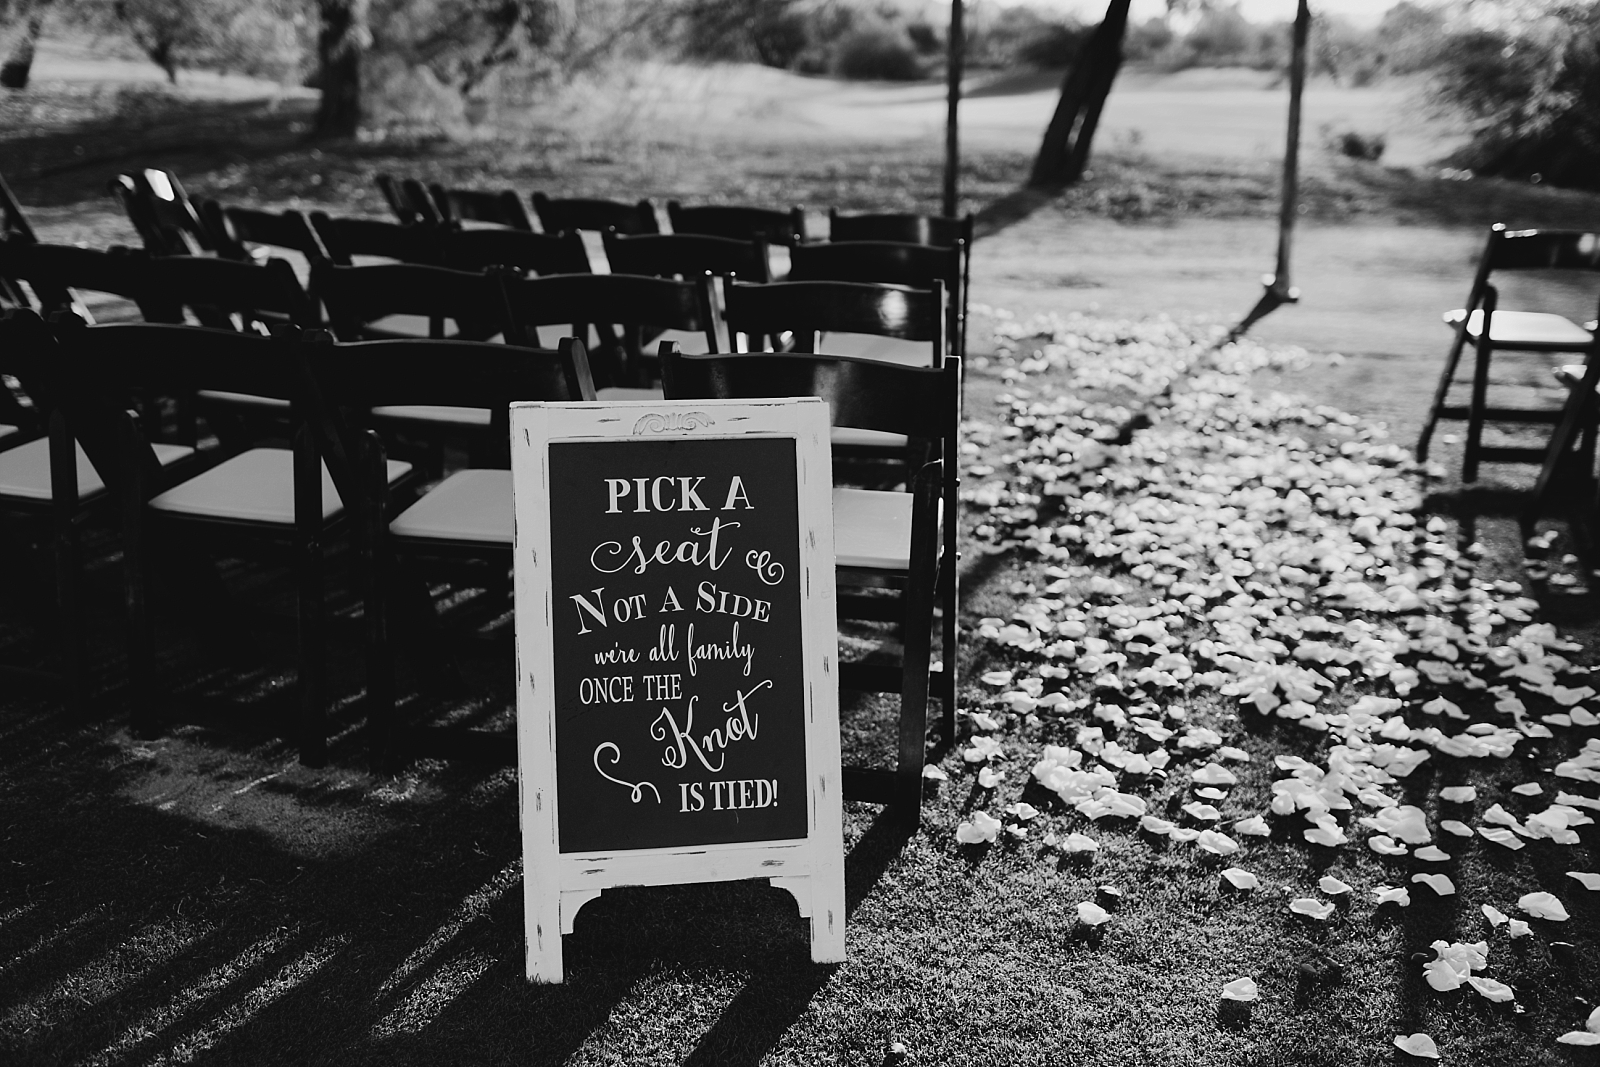 Pick a seat not a side we're all family once the knot is tied sign Ceremony The Legacy Golf Club Wedding Photos Phoenix AZ photographer Samantha Patri Photography